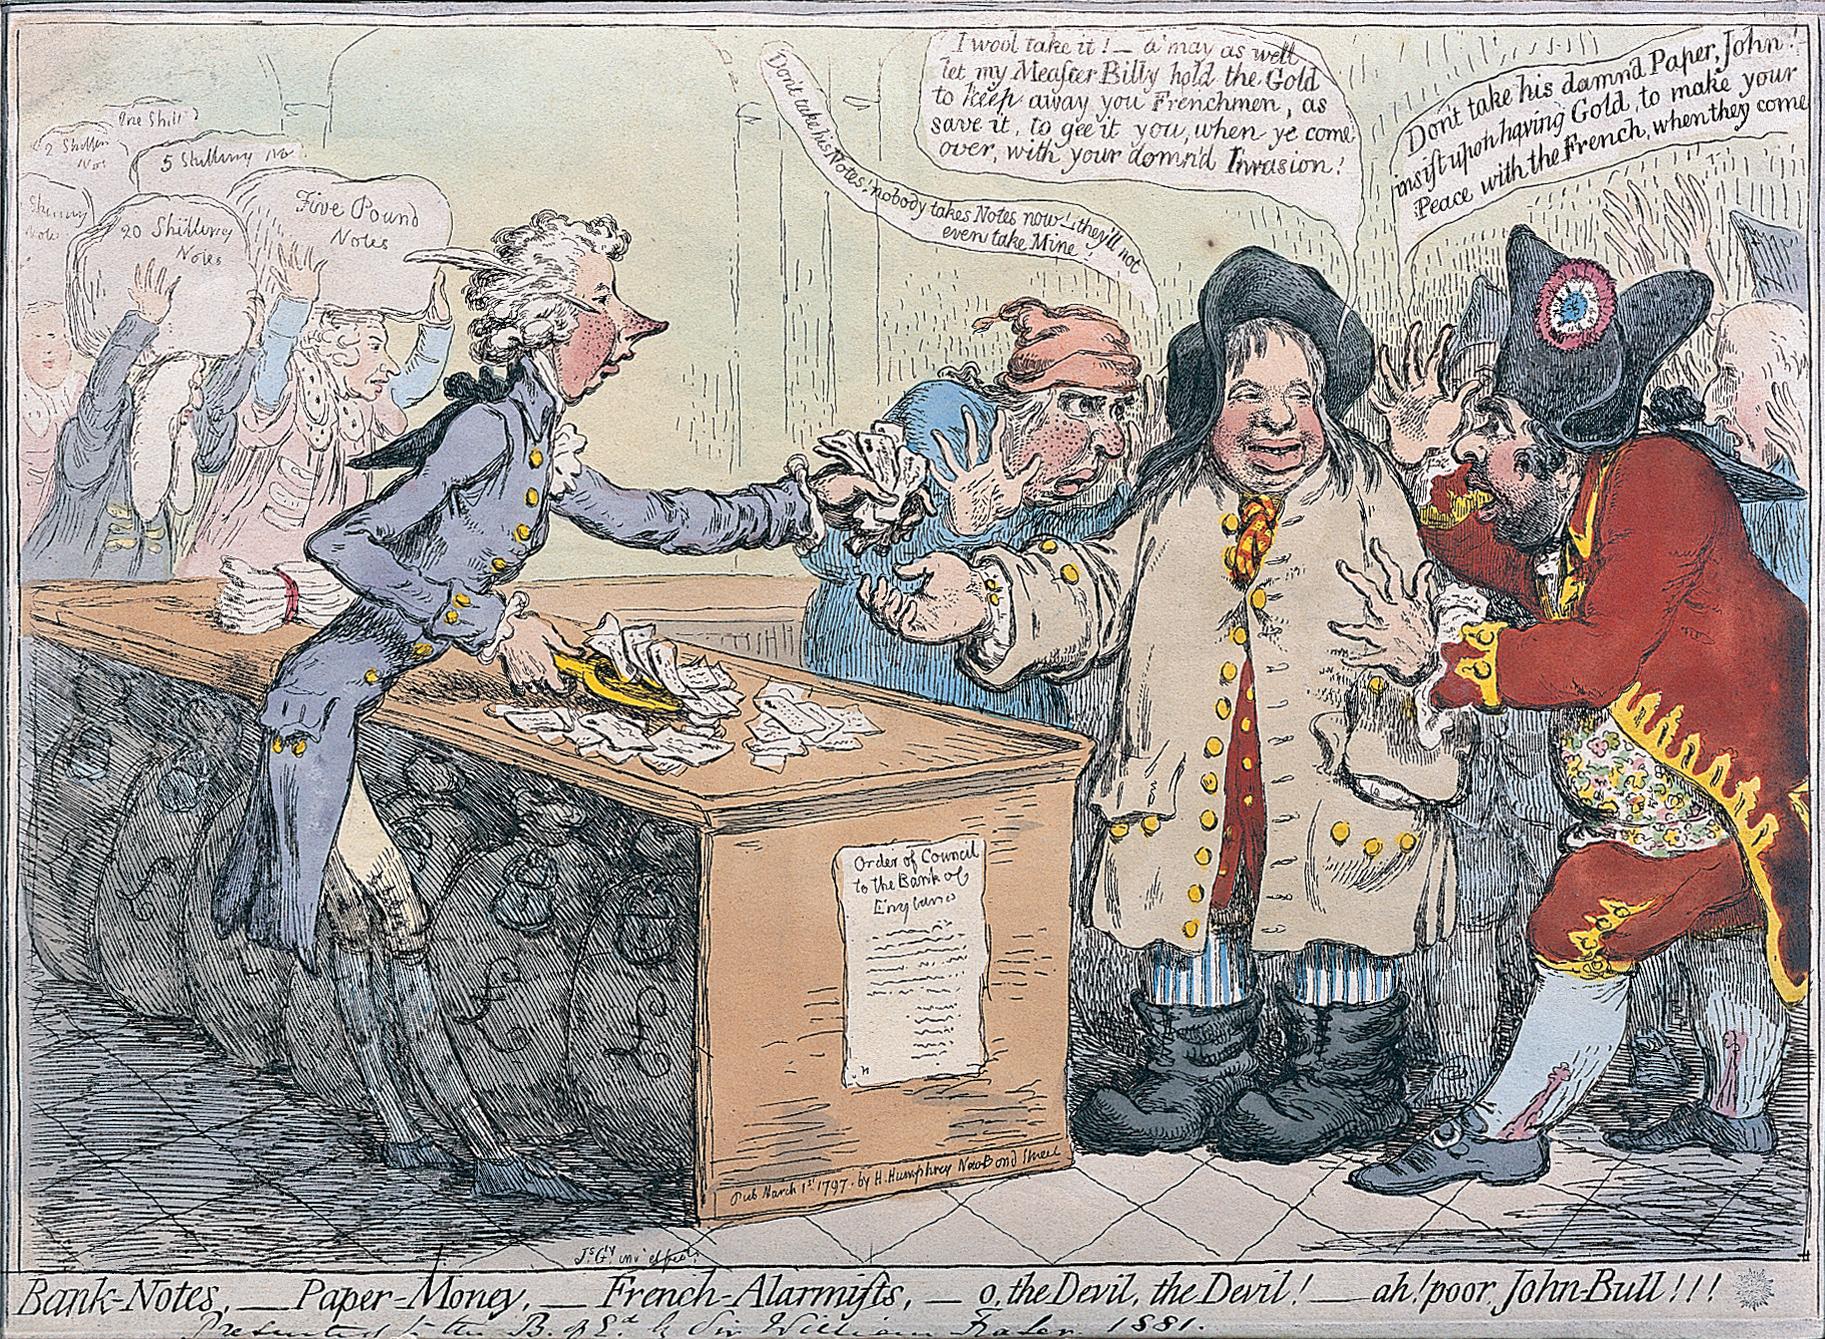 Banknotes, paper money and French alarmists, James Gillray, 1 March 1797.